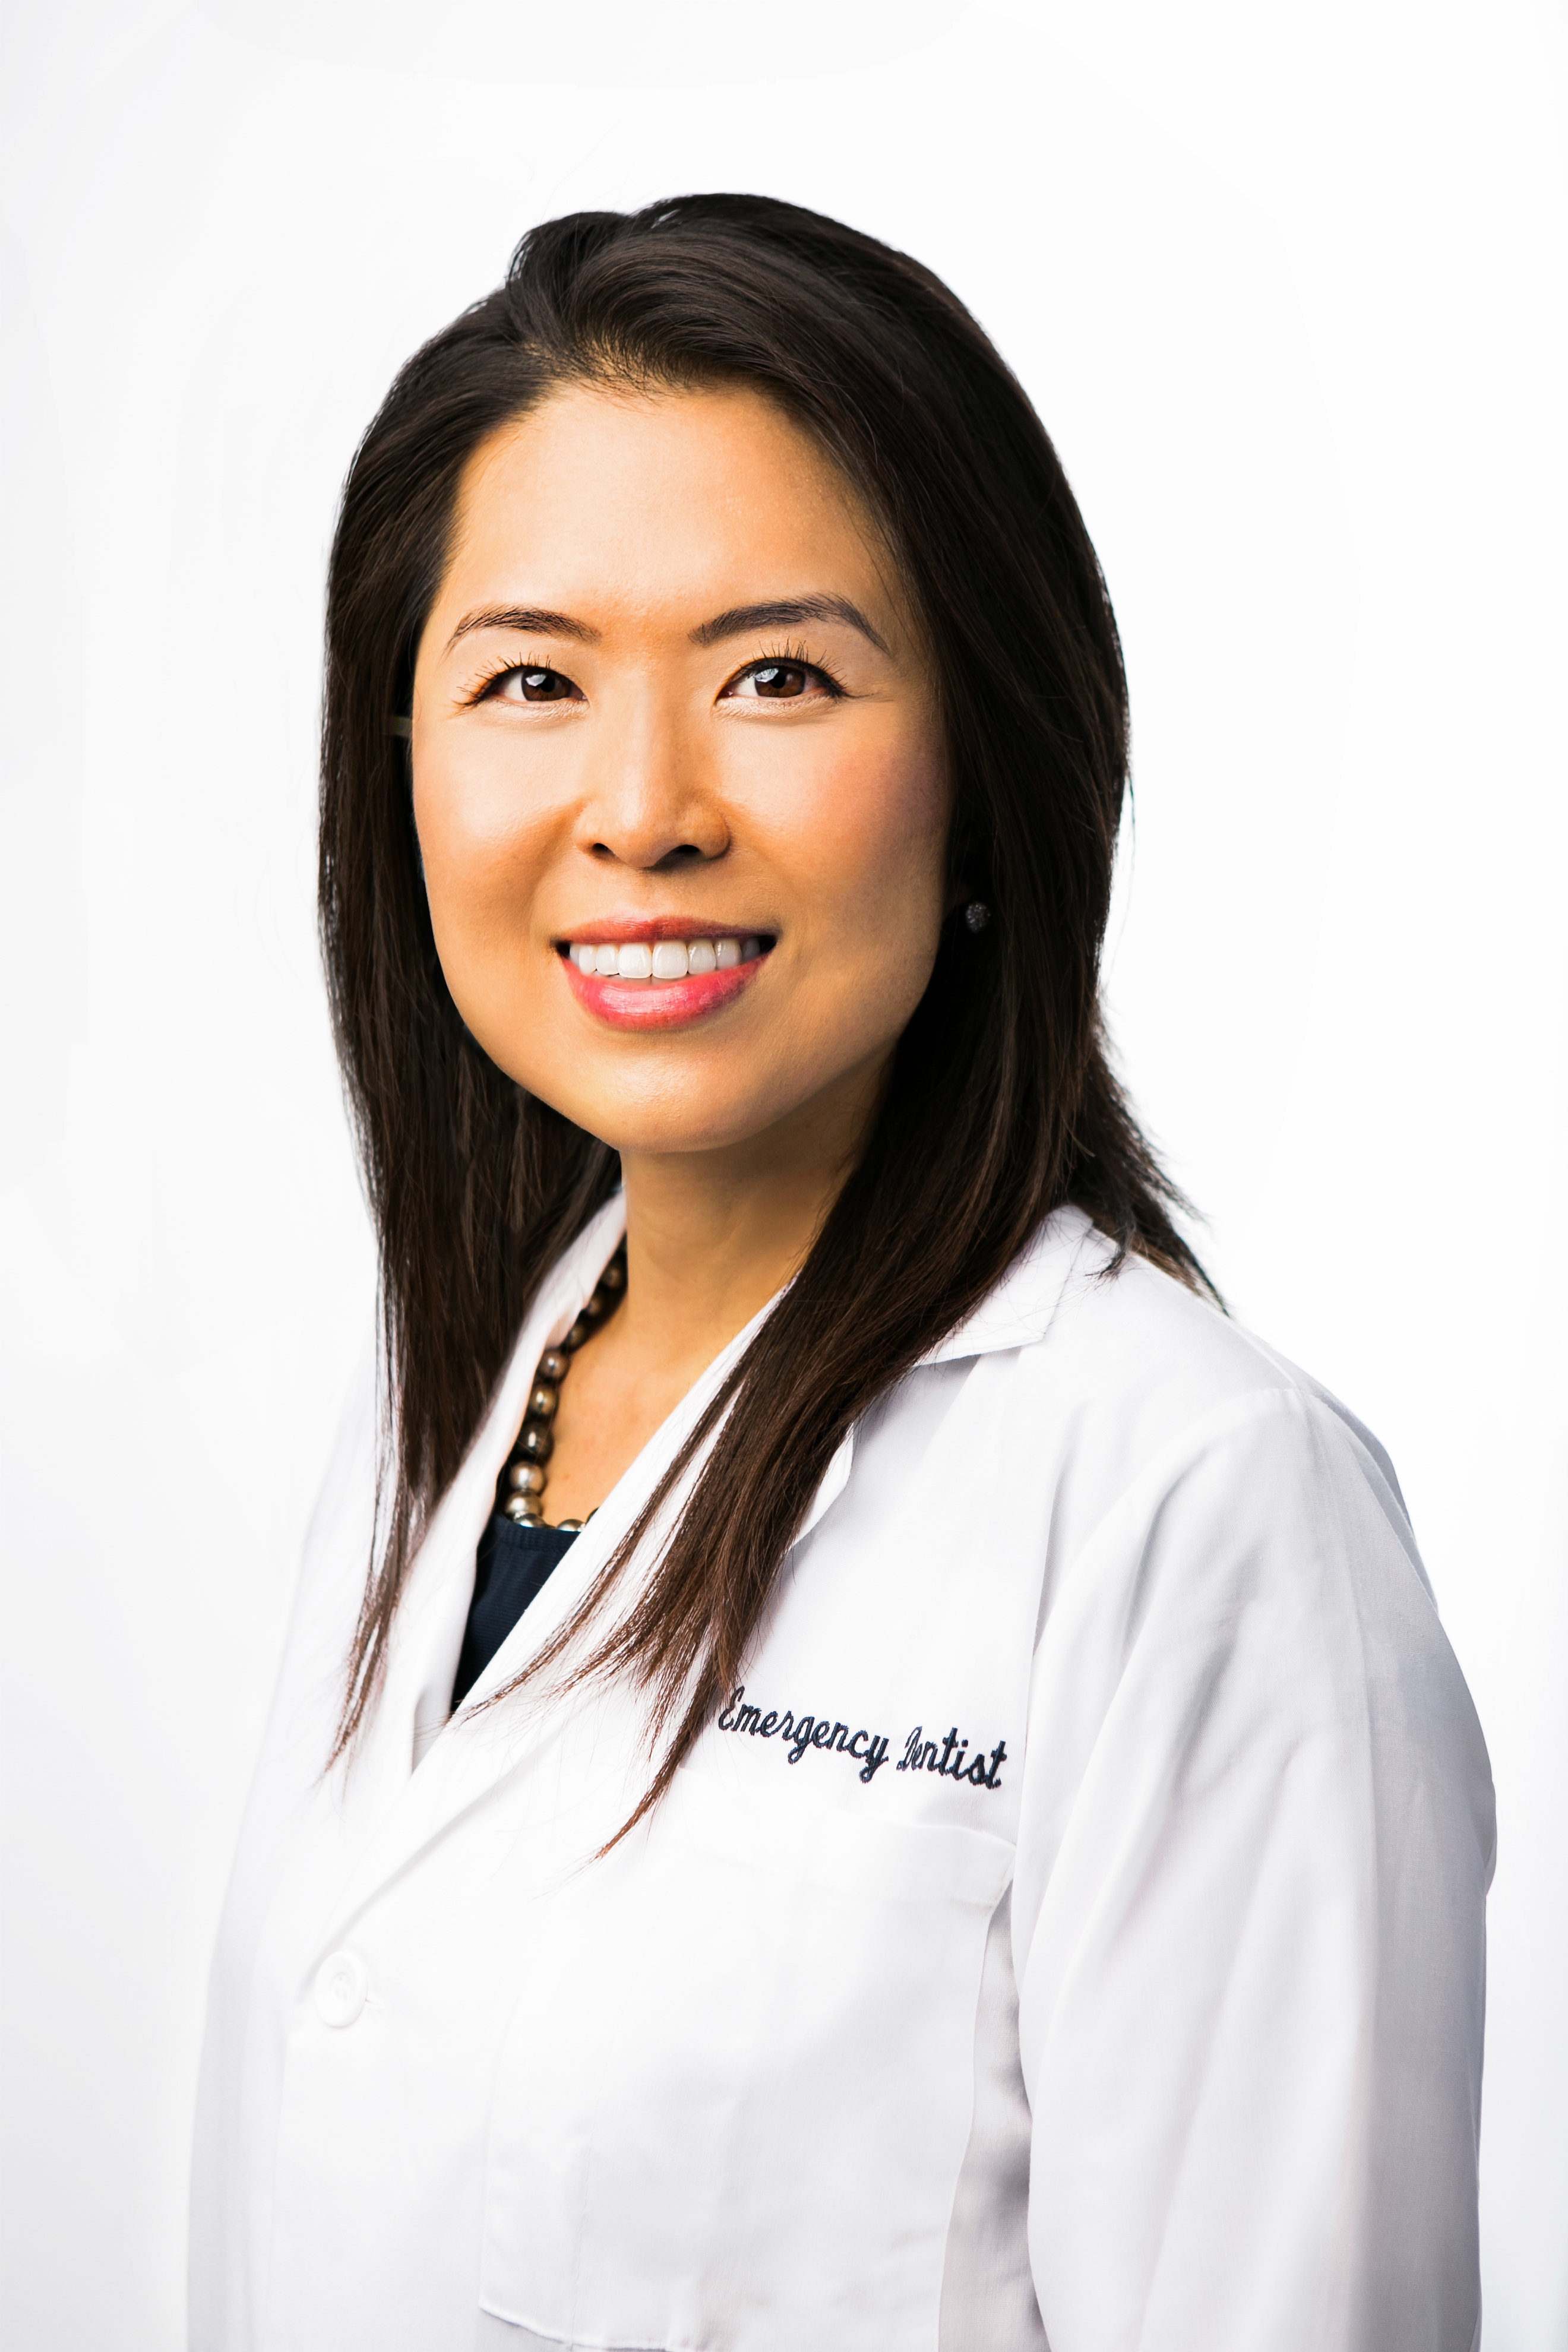 A photo of Han Lee, DMD, an orthodontist at Center City Emergency Dentist.